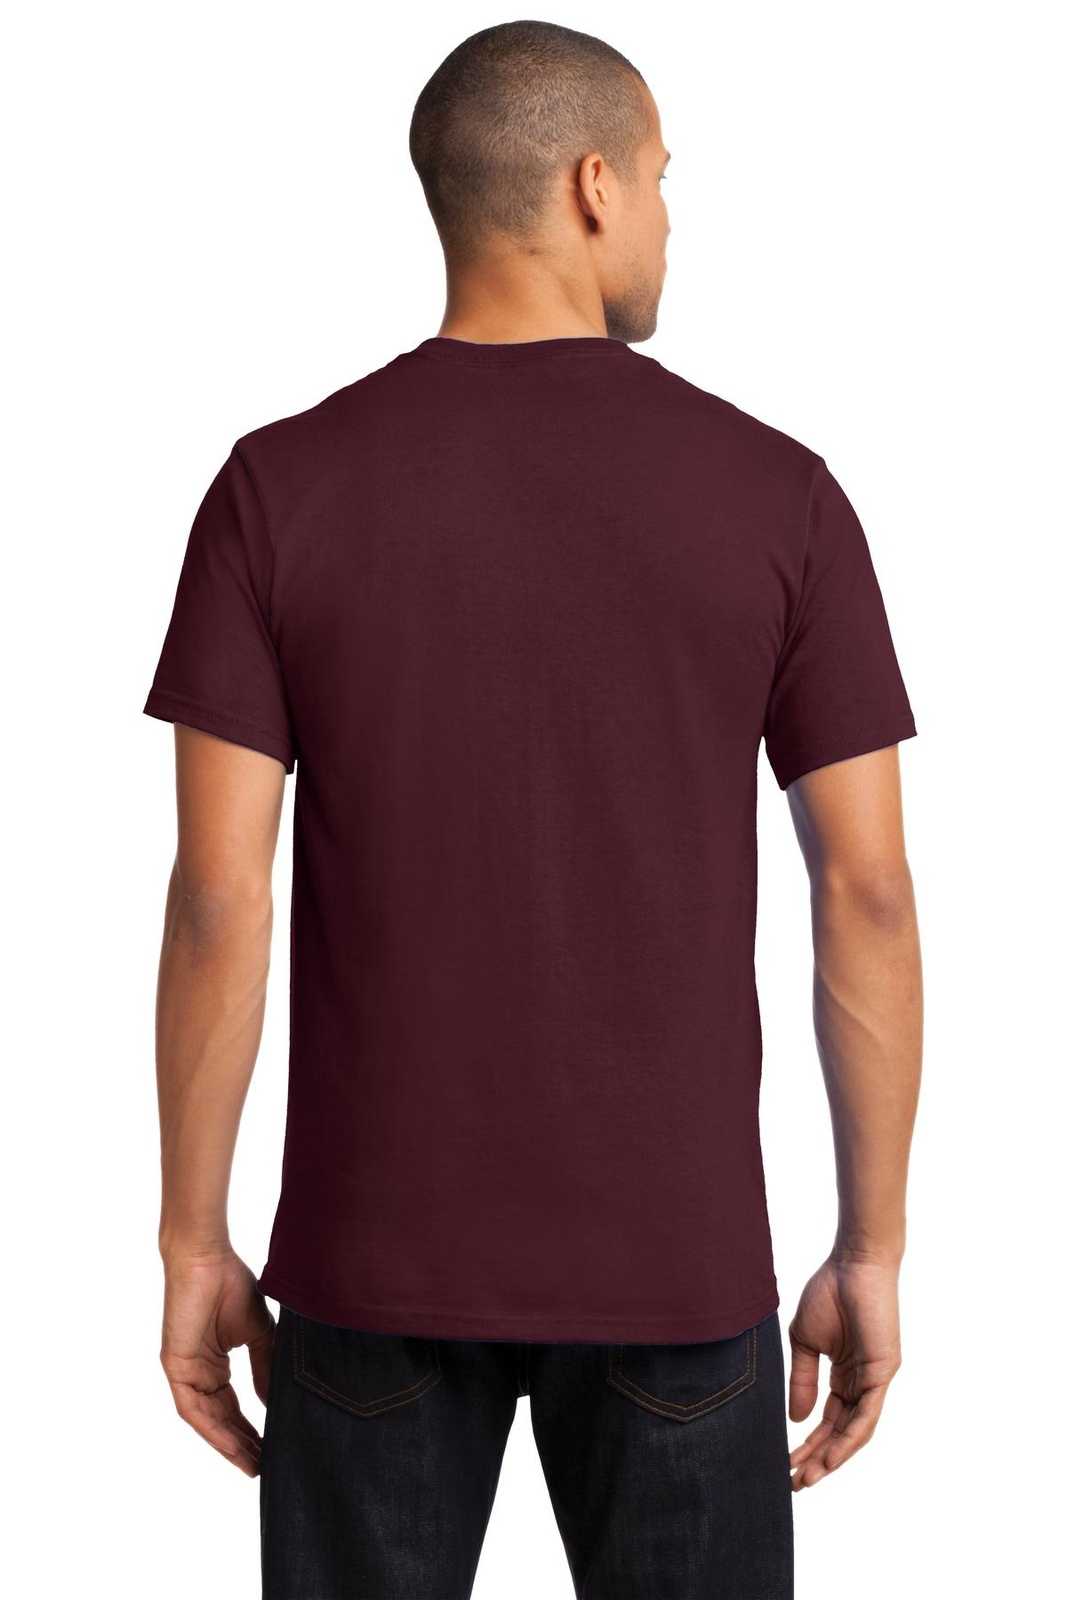 Port &amp; Company PC61P Essential Pocket Tee - Athletic Maroon - HIT a Double - 2